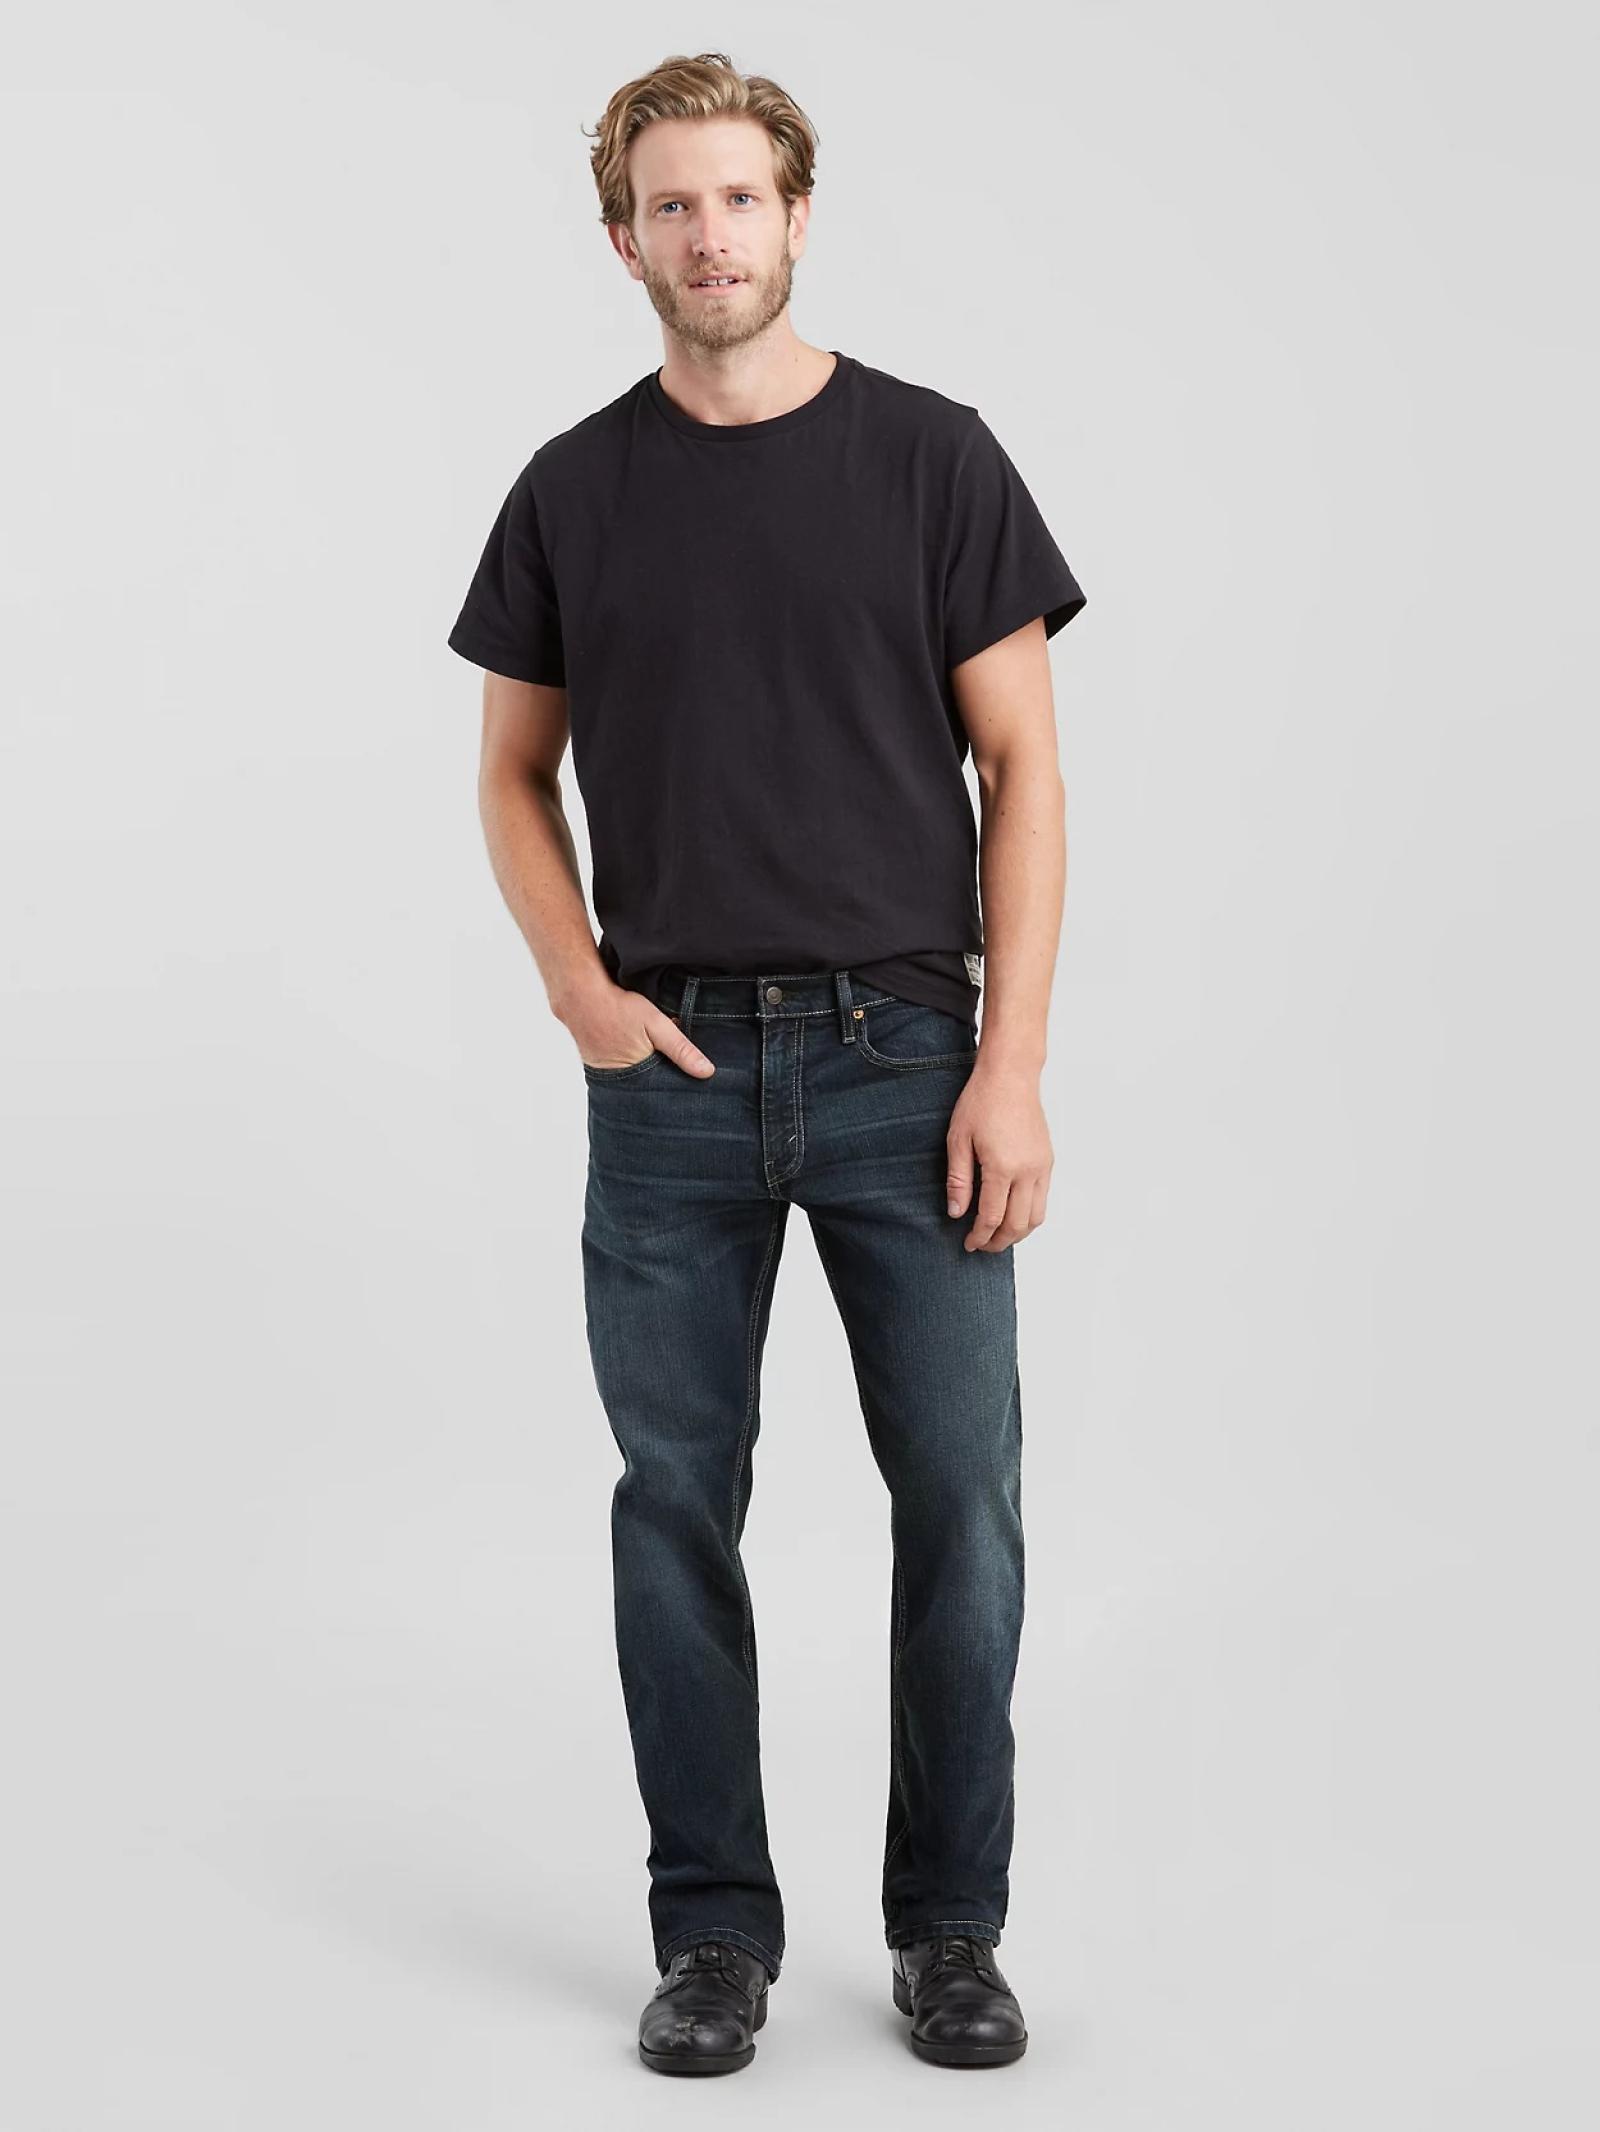 Levi’s Men’s 559 Relaxed Straight Jeans